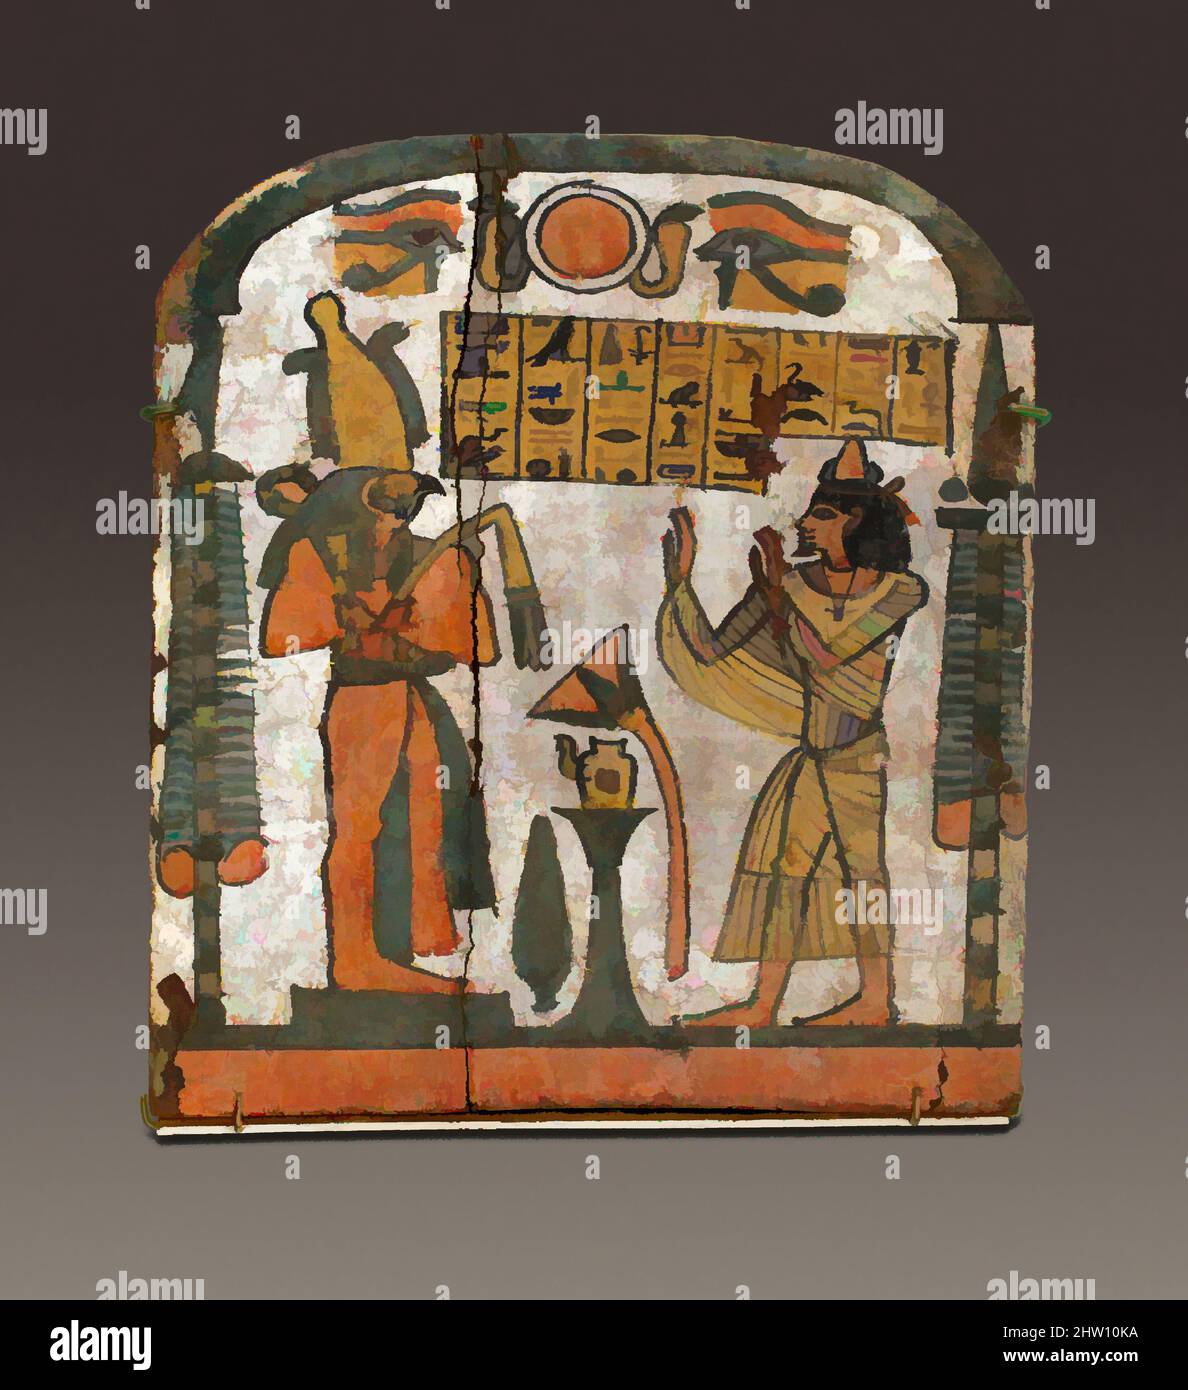 Art inspired by Stela of Nayefennebu, Third Intermediate Period, Dynasty 22, ca. 825–712 B.C., From Egypt, Upper Egypt, Thebes, Deir el-Bahri, Tomb, 1921–22, Wood, gesso, paint, H. 23.4 cm, This is one of four stelae found near the doorway of the brick chapel of the family of Saiah, a, Classic works modernized by Artotop with a splash of modernity. Shapes, color and value, eye-catching visual impact on art. Emotions through freedom of artworks in a contemporary way. A timeless message pursuing a wildly creative new direction. Artists turning to the digital medium and creating the Artotop NFT Stock Photo